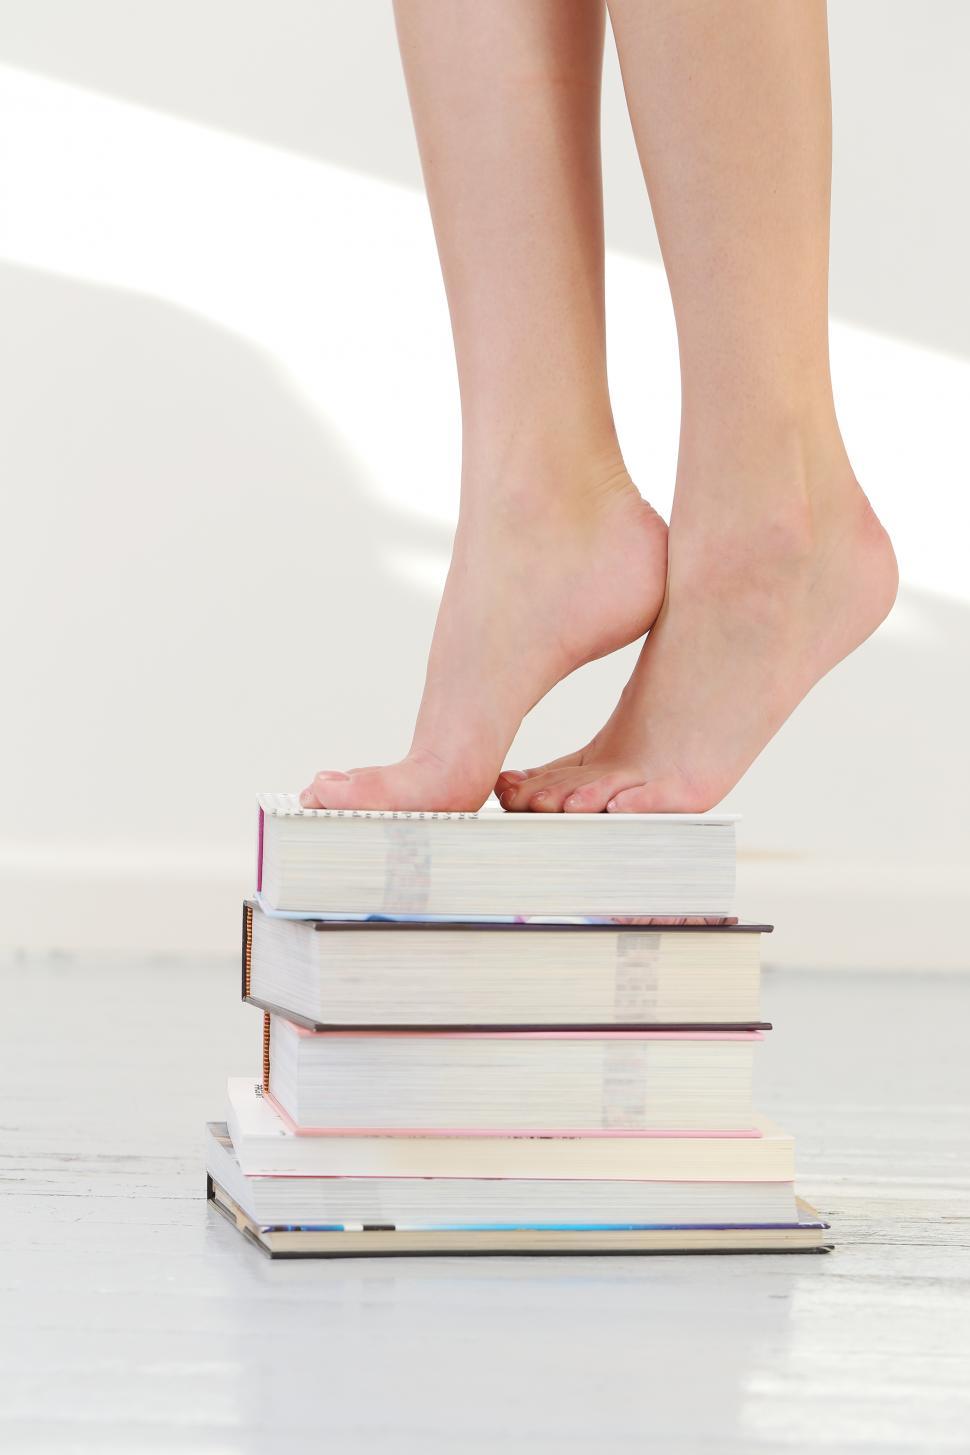 Free Image of Person standing on a stack of books 